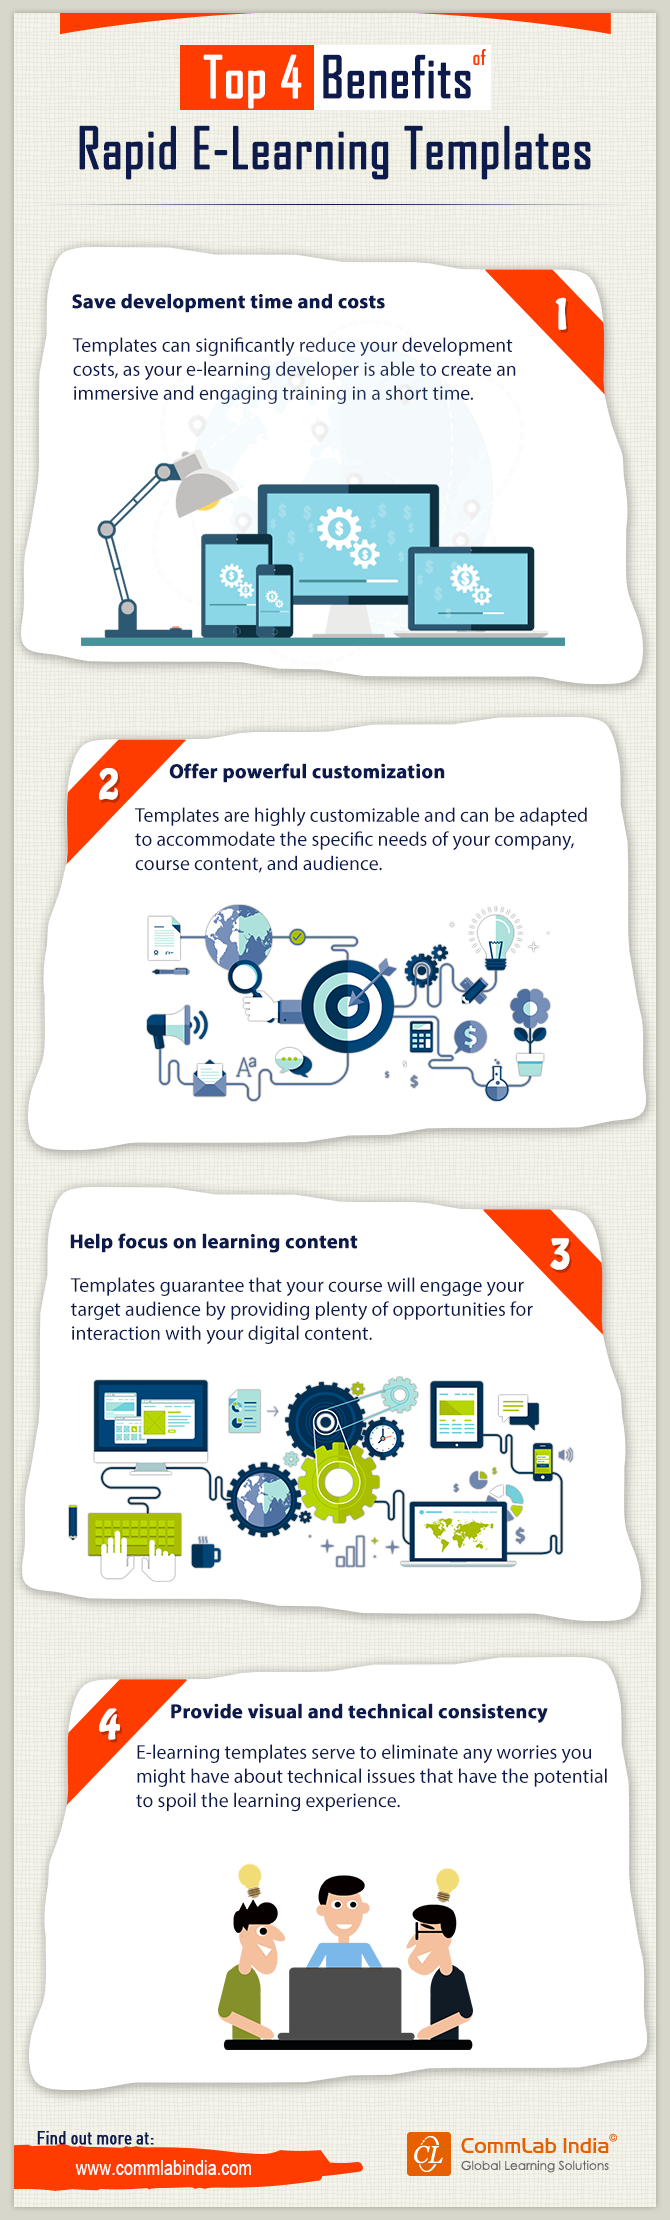 Top 4 Benefits of Rapid E-Learning Templates [Infographic]